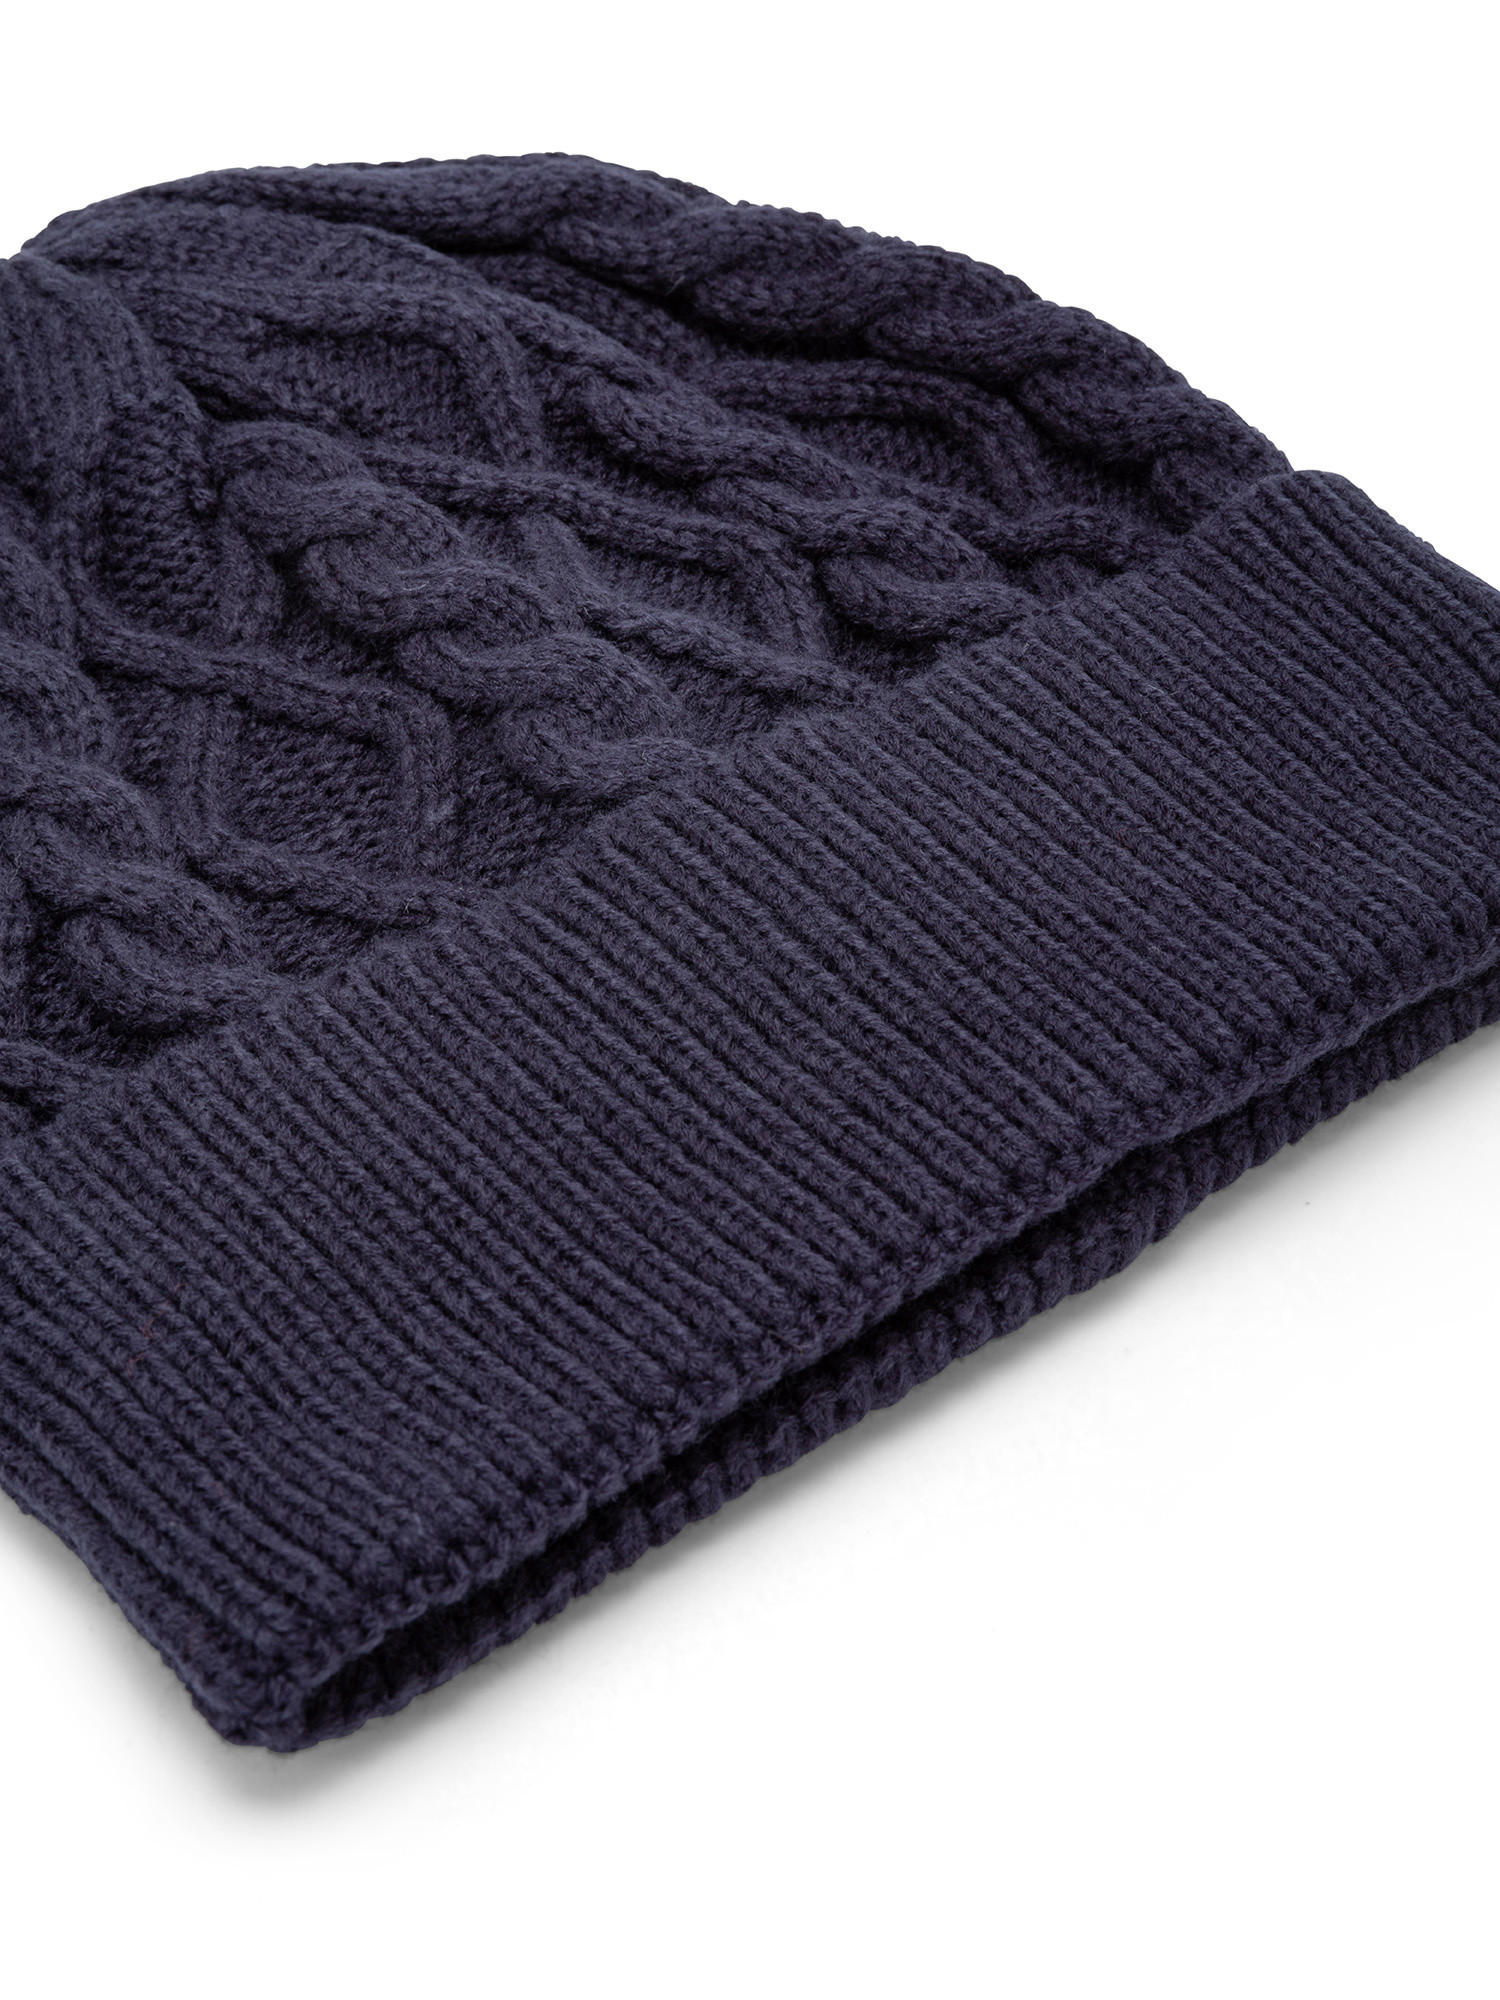 Luca D'Altieri - Beanie with knitted pattern, Dark Blue, large image number 1